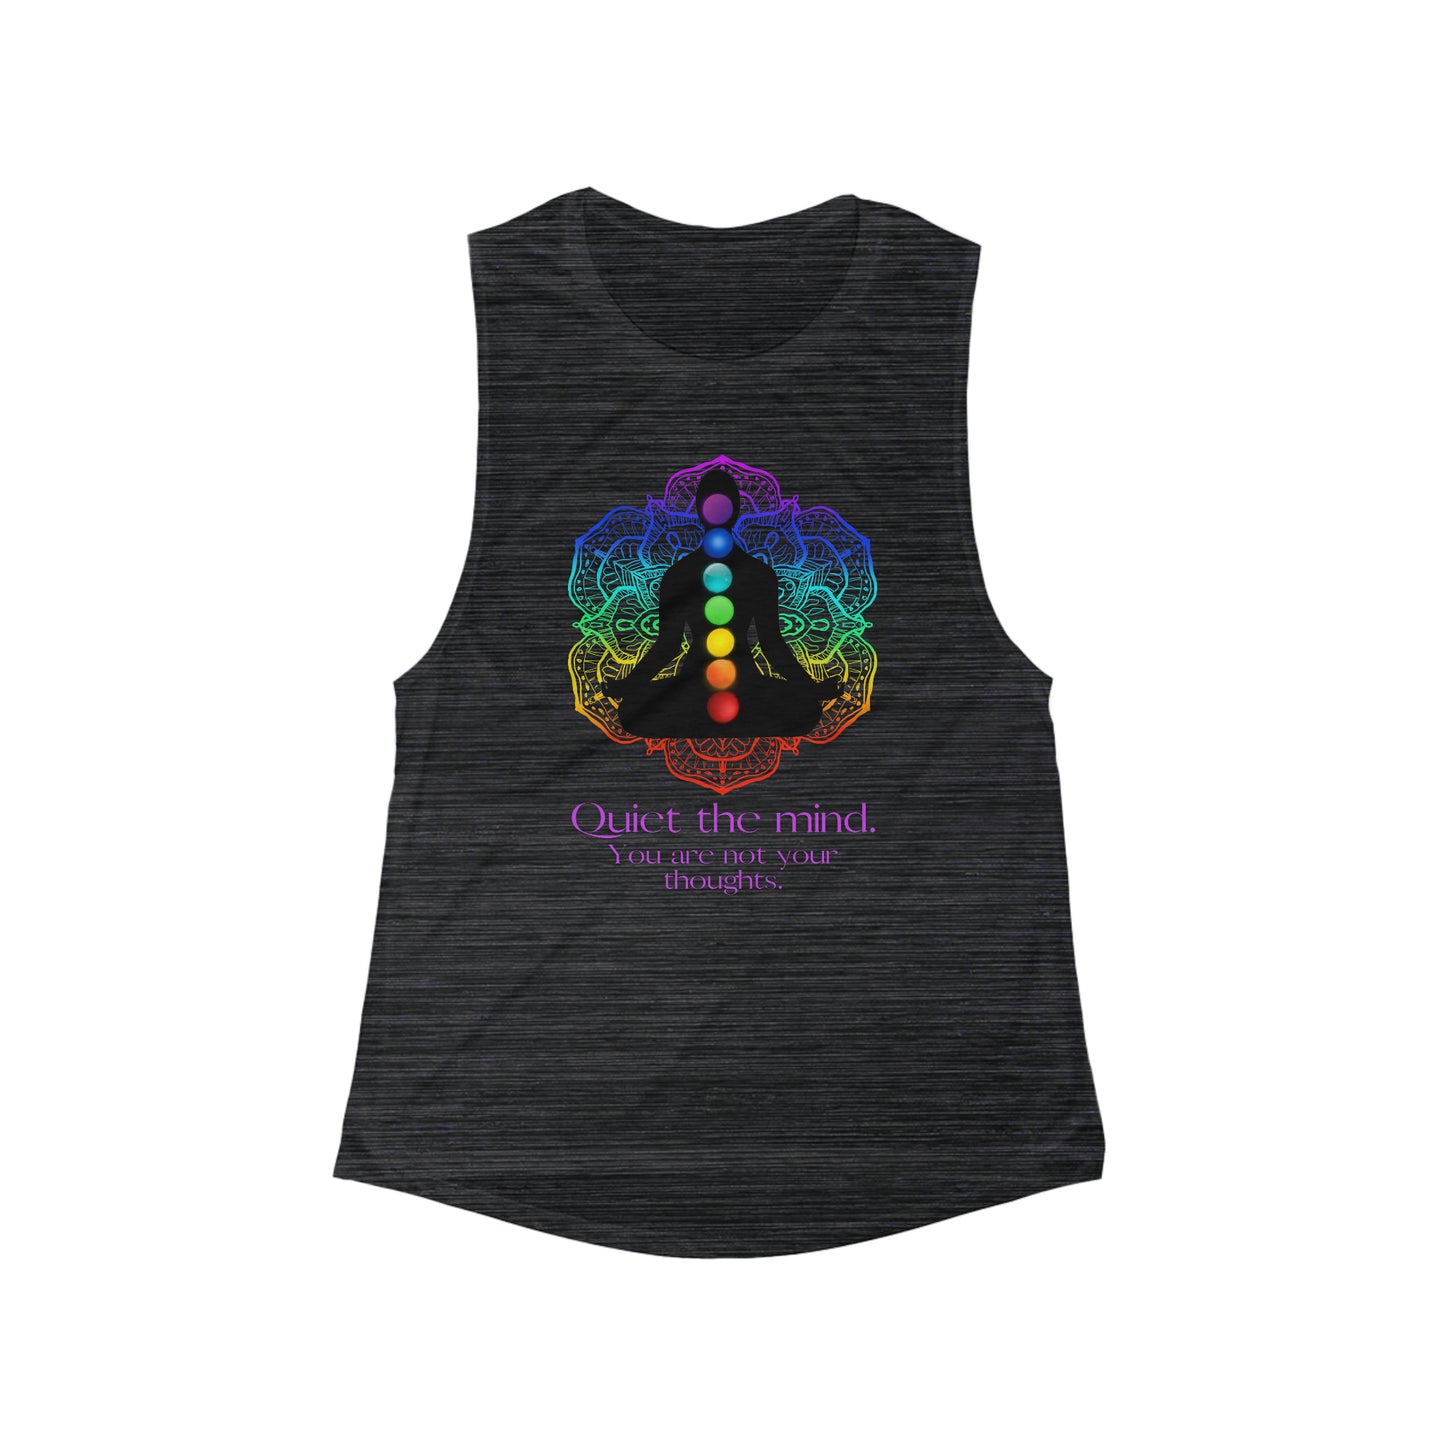 Quiet the mind Not Aggressive. POWERFUL™️ Women's Flowy Scoop Muscle Tank